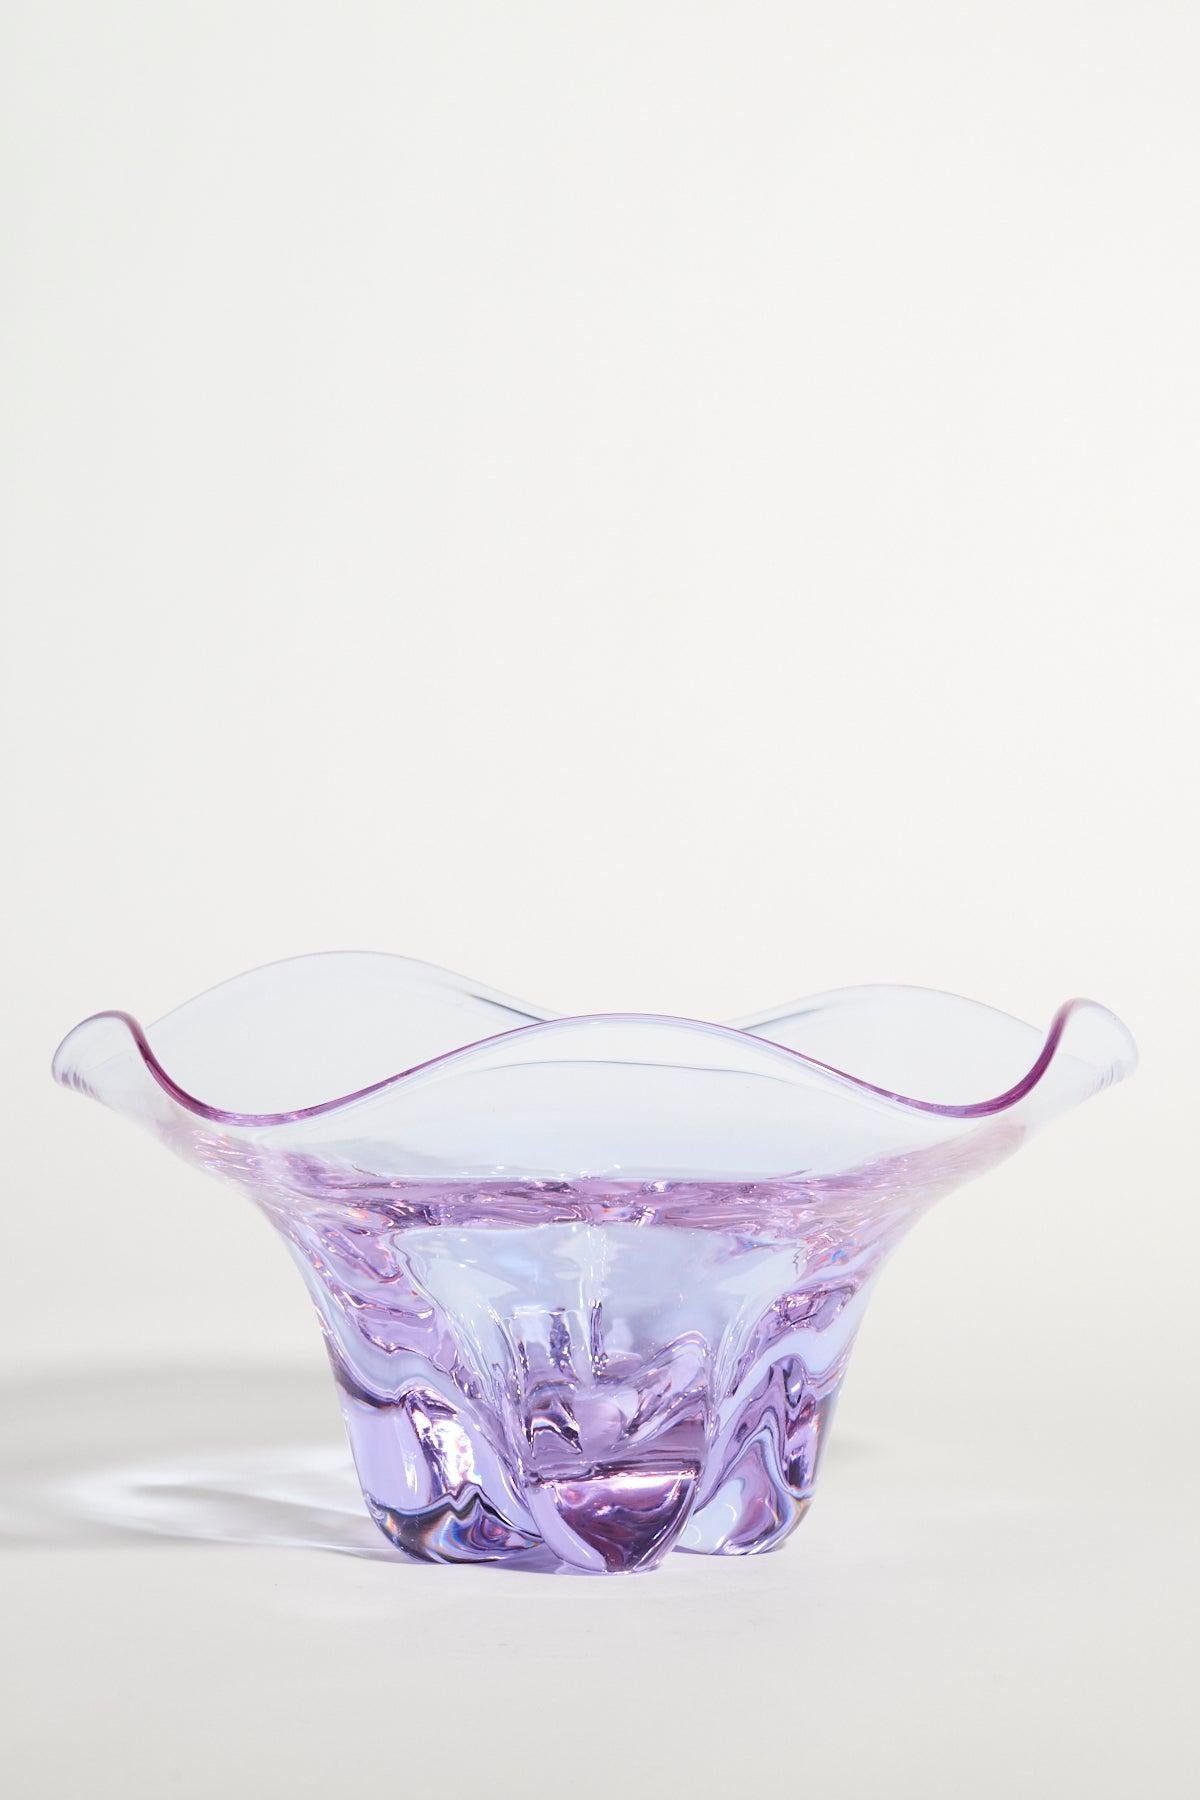 Translucent lilac glass bowl with ruffled edge and heavy base.